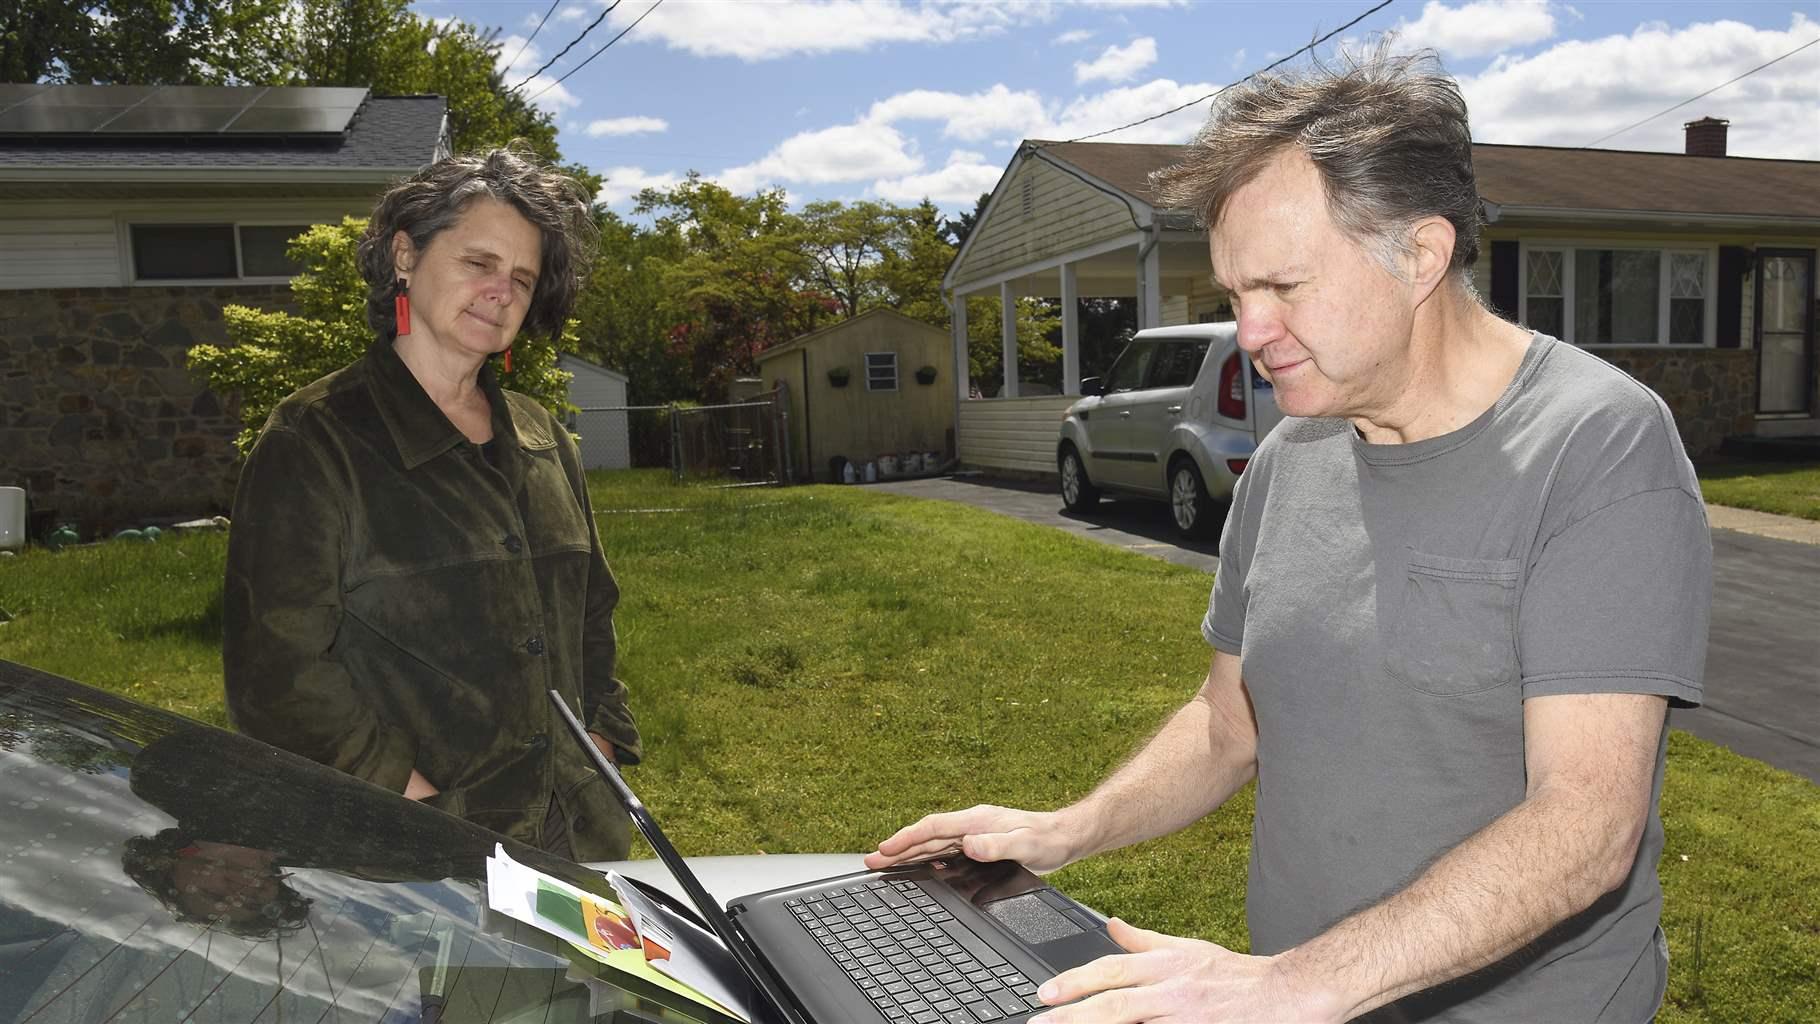 Ed Witles, right, who has been repairing and repurposing discarded or donated older computers and donating them to students, looks over a laptop in Glen Burnie, Maryland. 